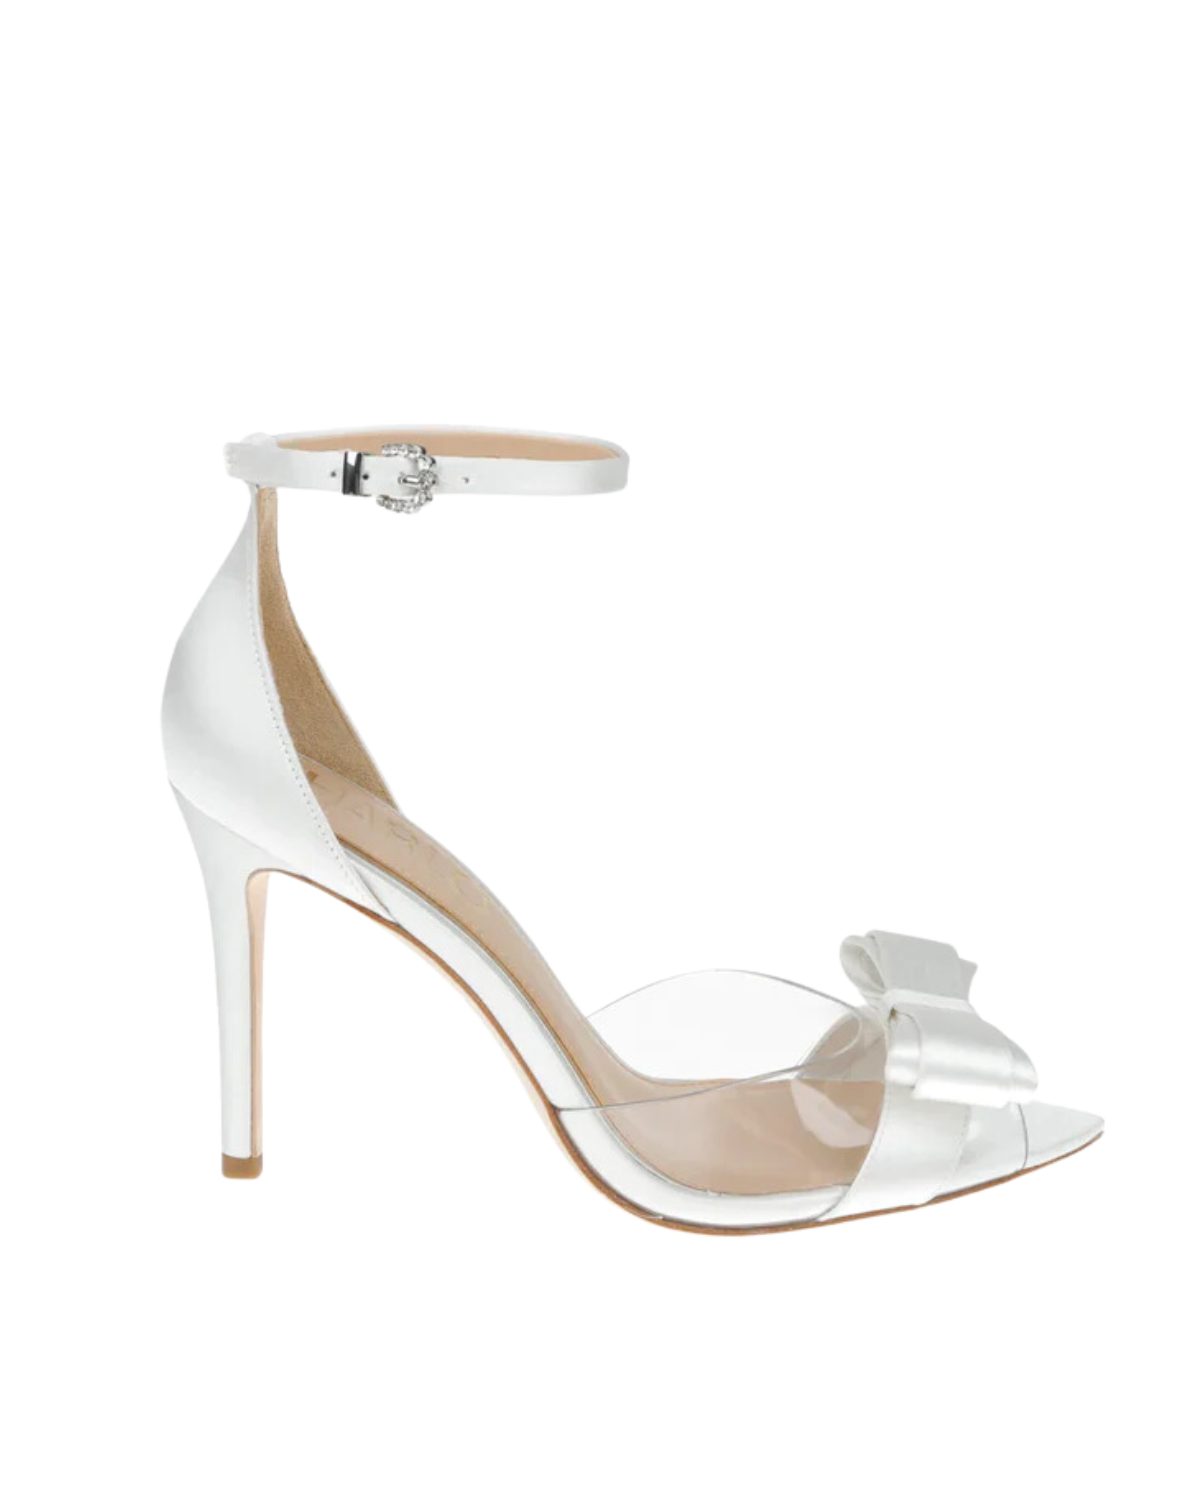 Chloe - White Point Bow Heels - Final sizes